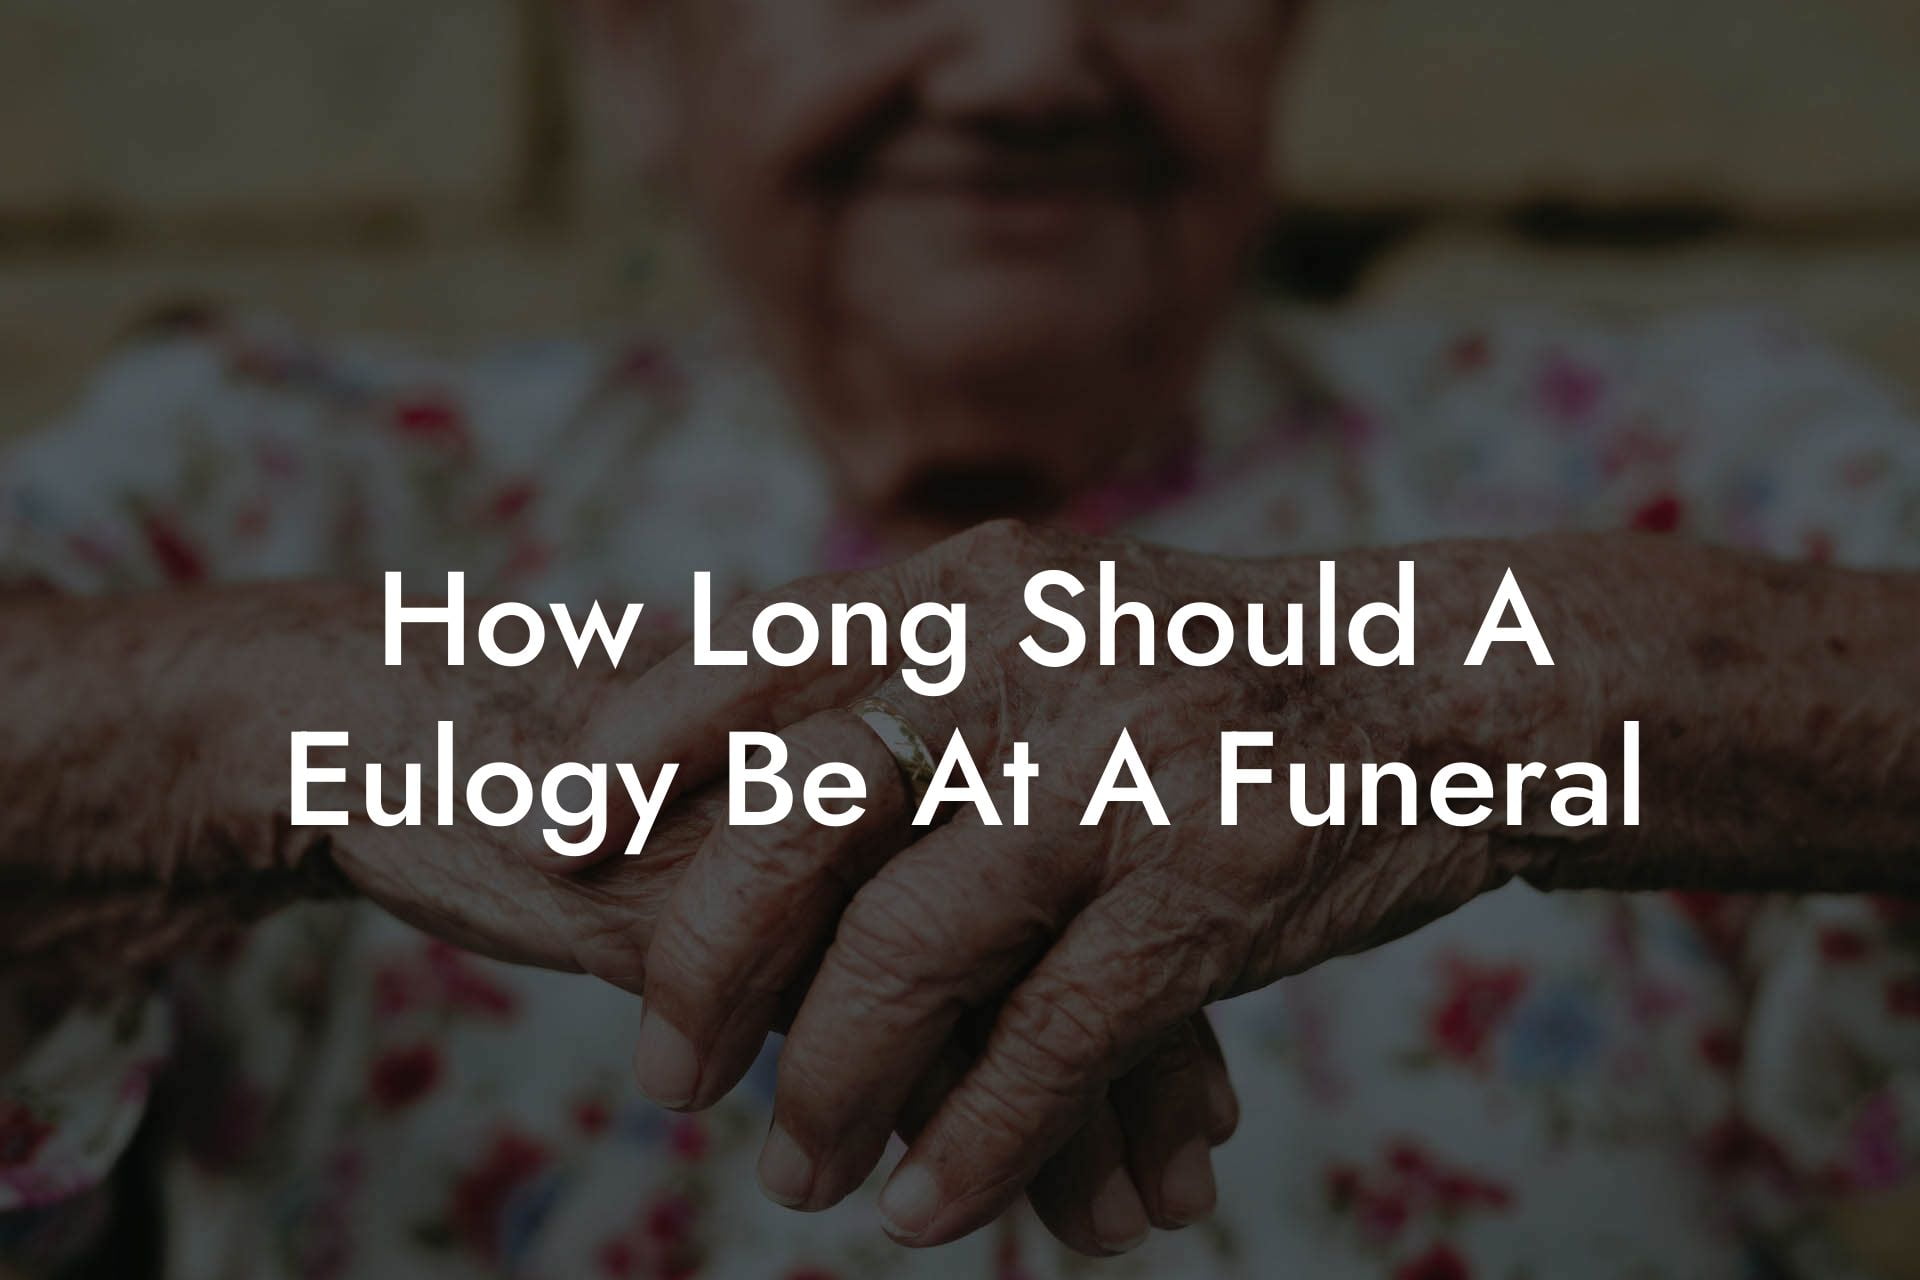 How Long Should A Eulogy Be At A Funeral?